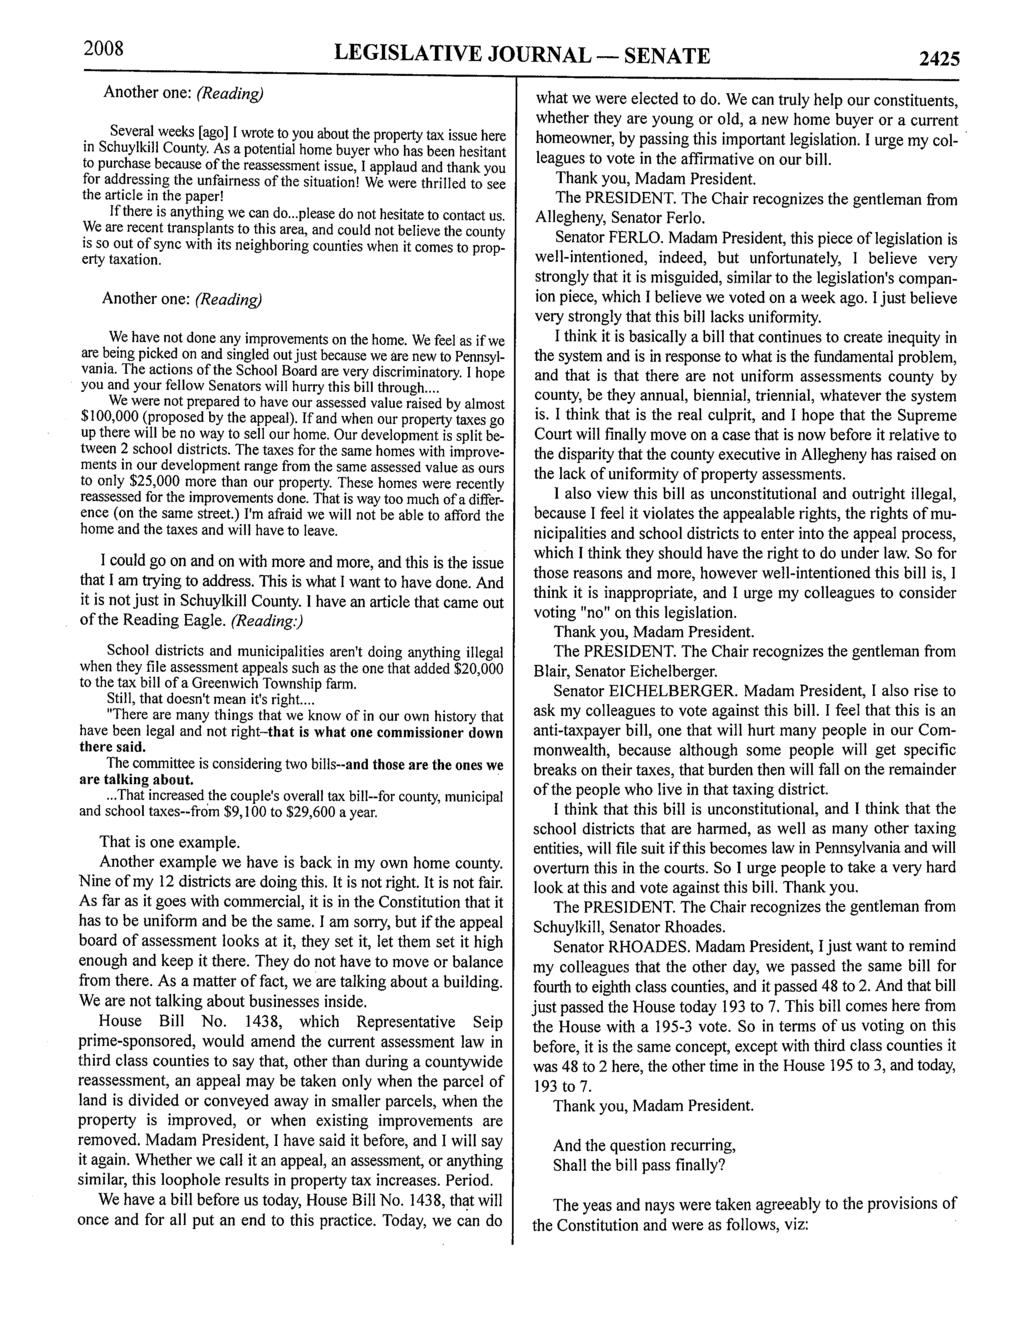 2008 LEGISLATIVE JOURNAL - SENATE 2425 Another one: (Reading) Several weeks [ago] I wrote to you about the property tax issue here in Schuylkill County.